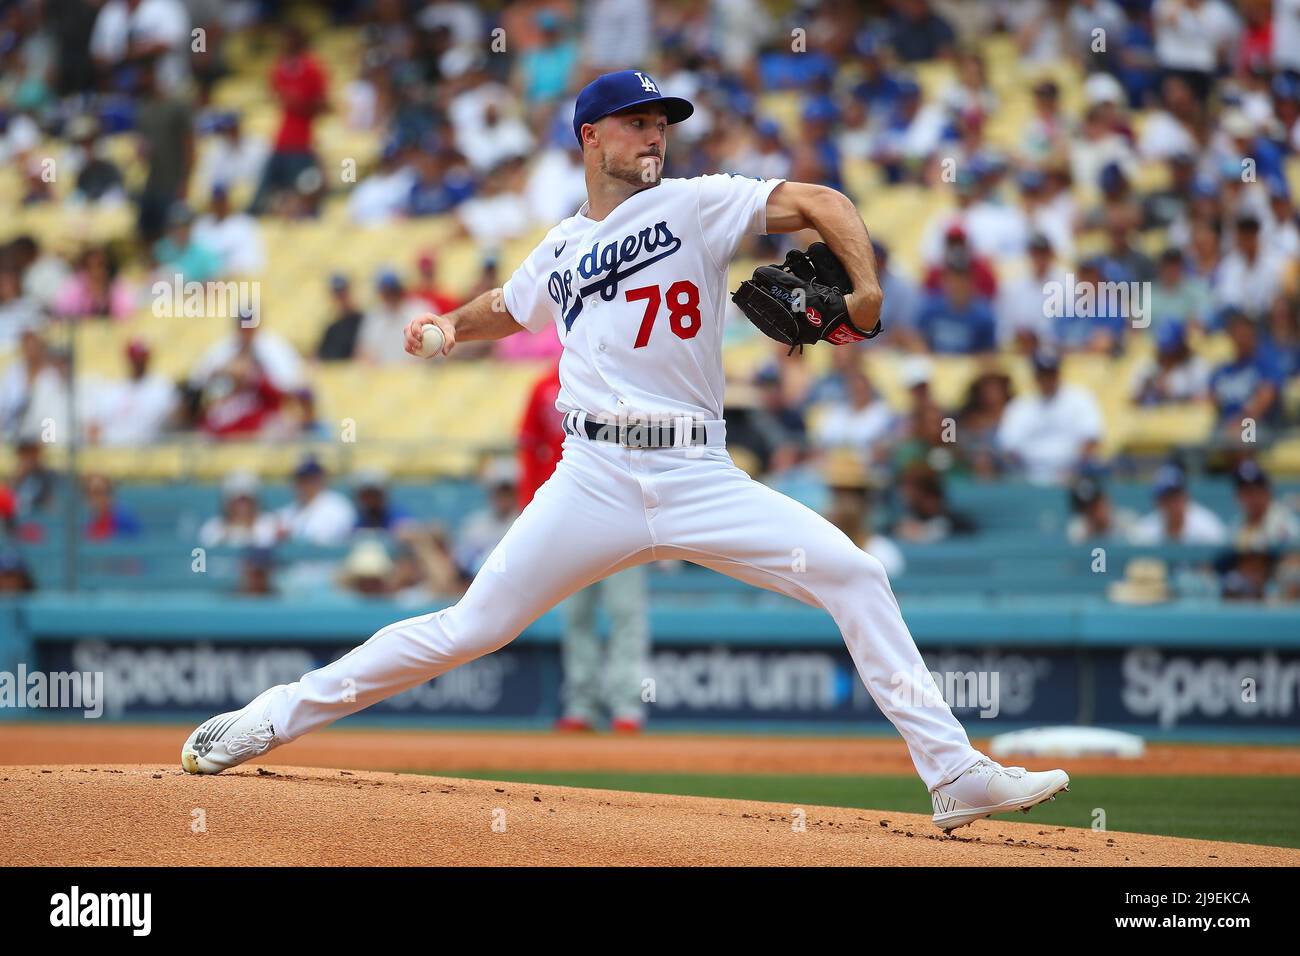 Los Angeles Dodgers pitcher Michael Grove (78) pitches during a MLB baseball game against the Philadelphia Phillies, Sunday, May. 15, 2022, in Los Ang Stock Photo